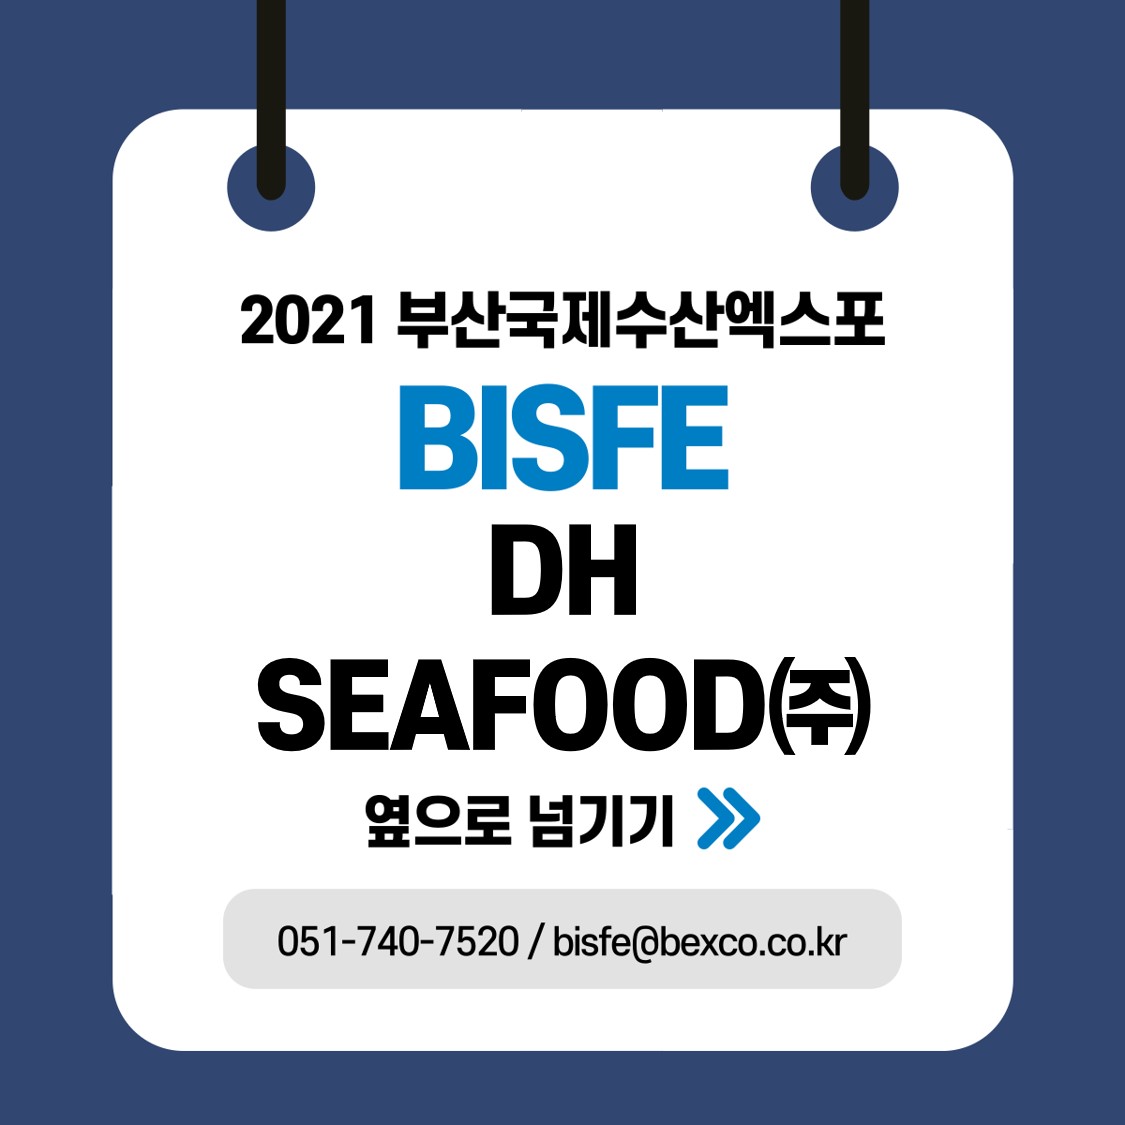 DH SEAFOOD(주)